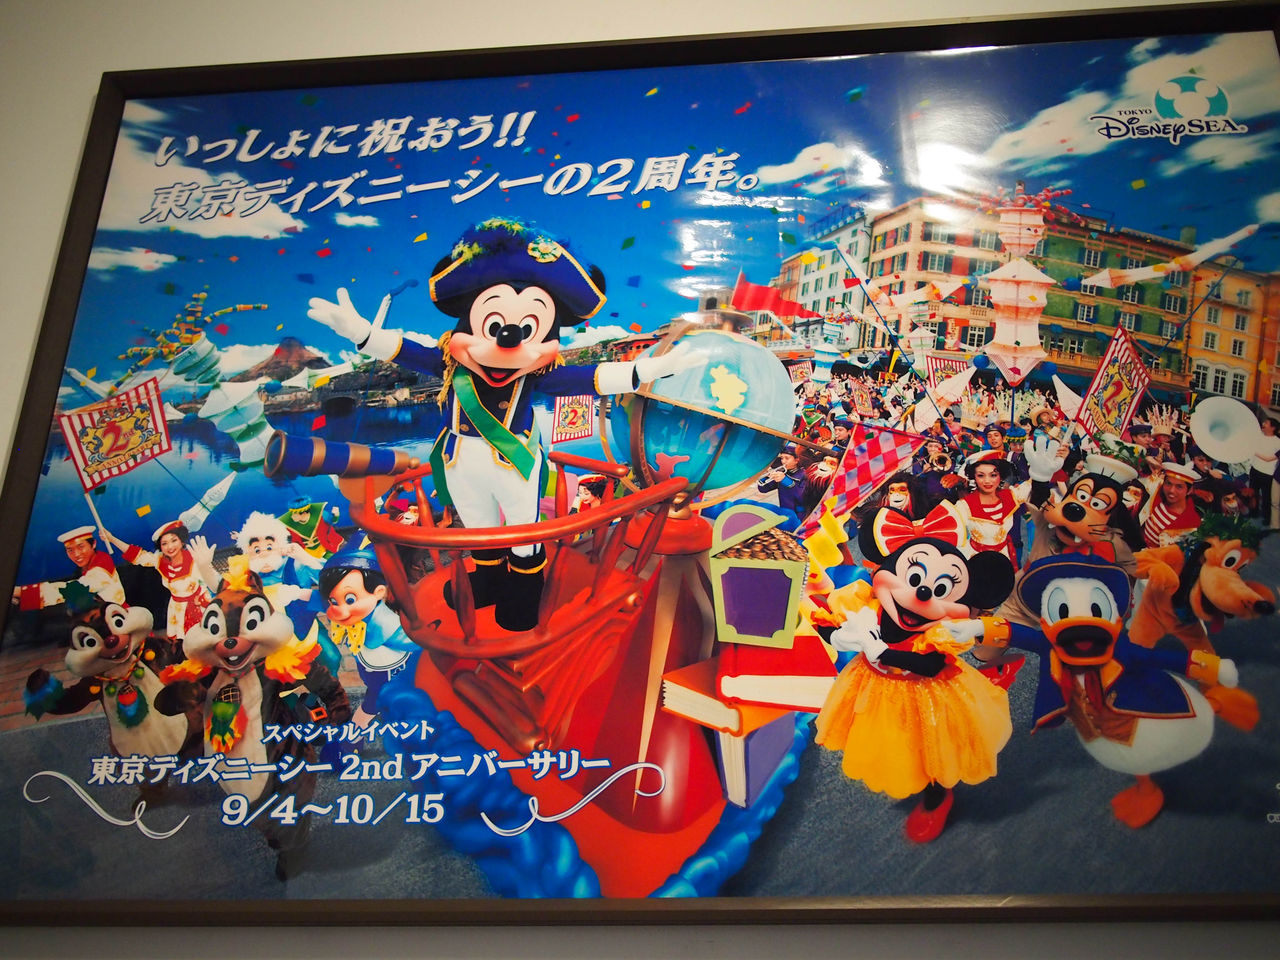 Tds15周年記念展示in金沢 Suitcase And Disney